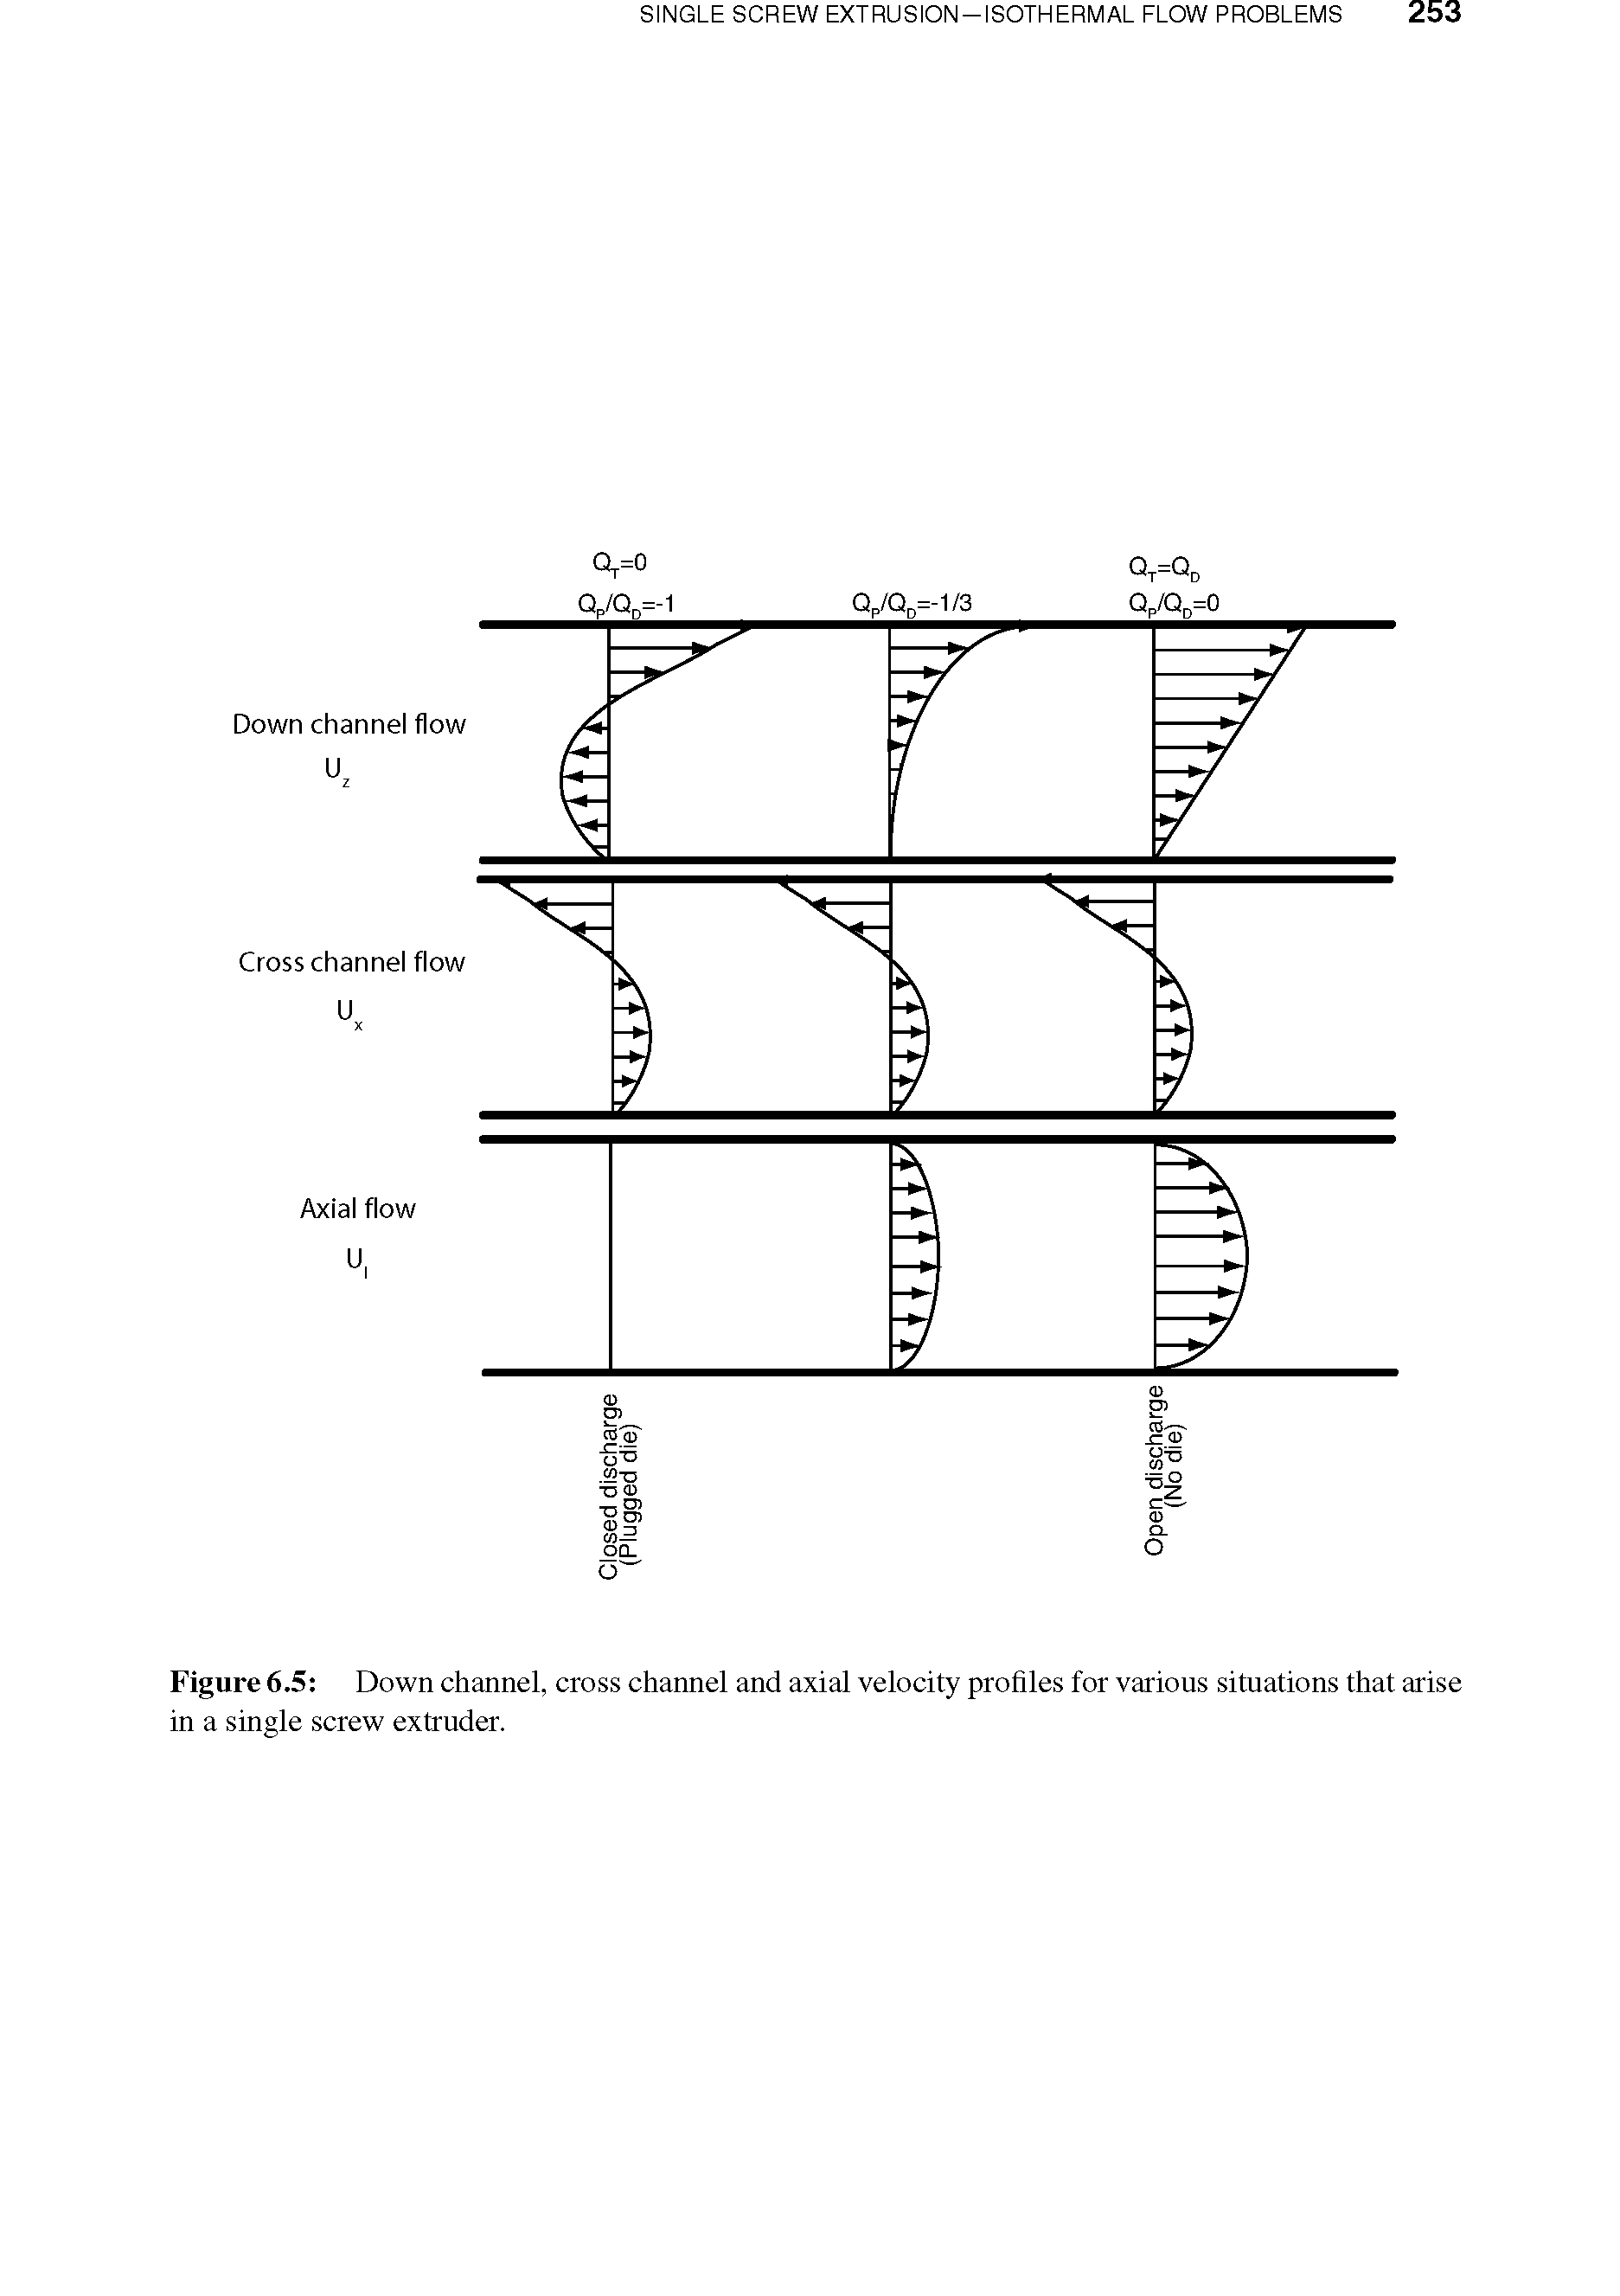 Figure 6.5 Down channel, cross channel and axial velocity profiles for various situations that arise in a single screw extruder.